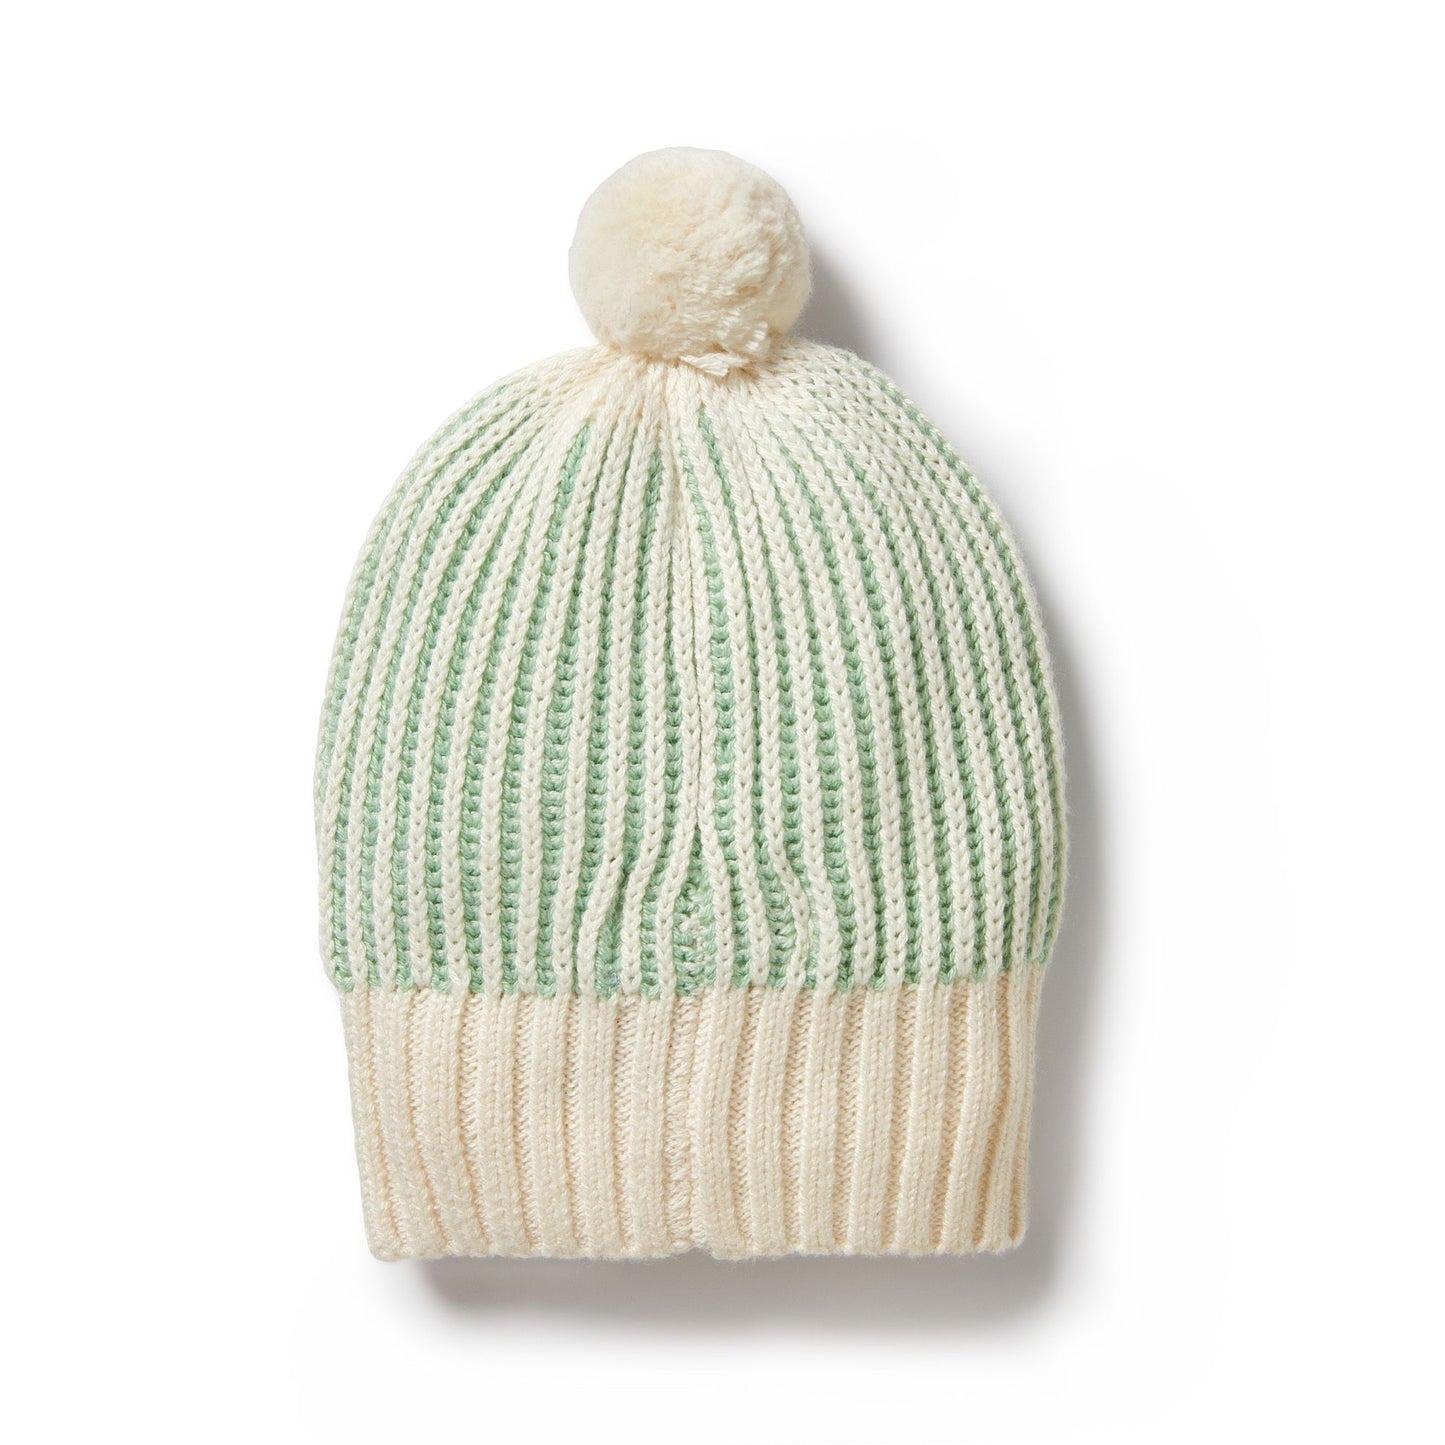 "Wilson & Frenchy" - Knitted Rib Beanie - Mint Green